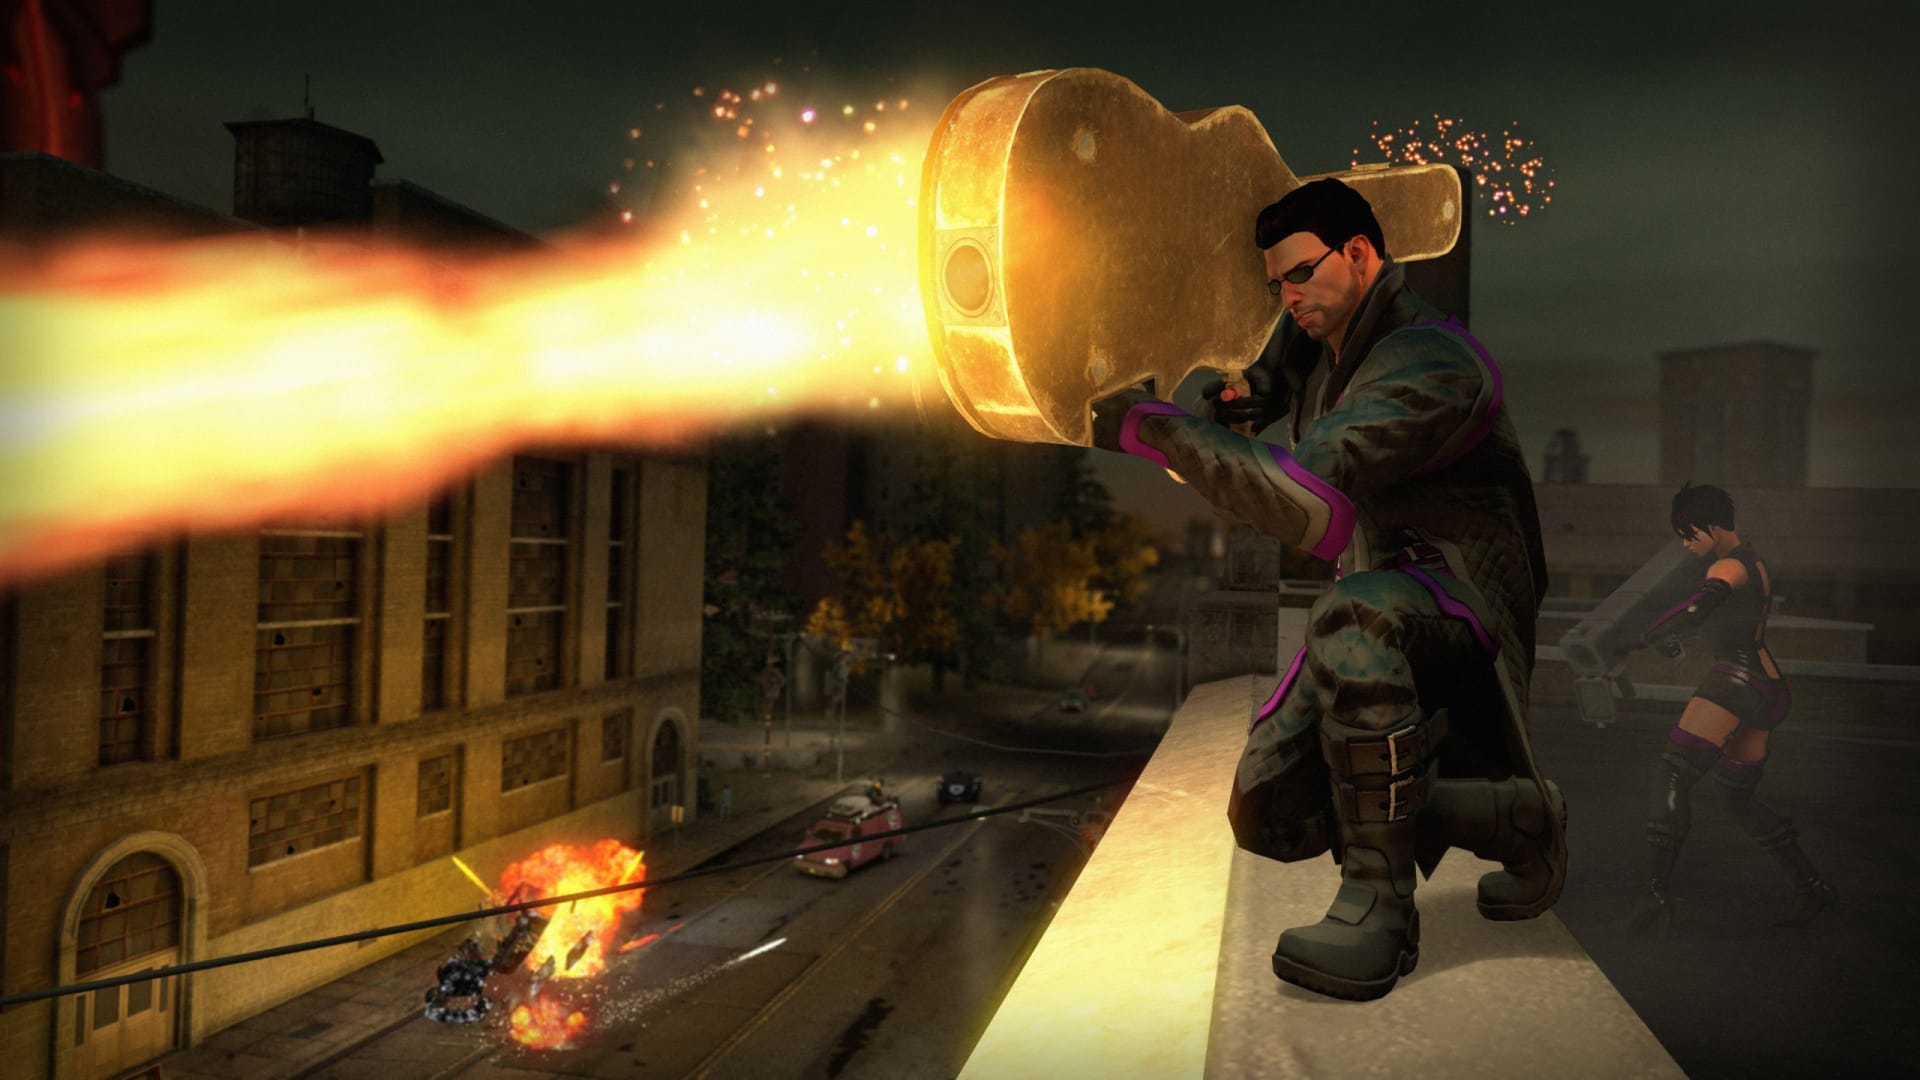 Saints Row Gat Out Of Hell and Saints Row IV Re-Elected release